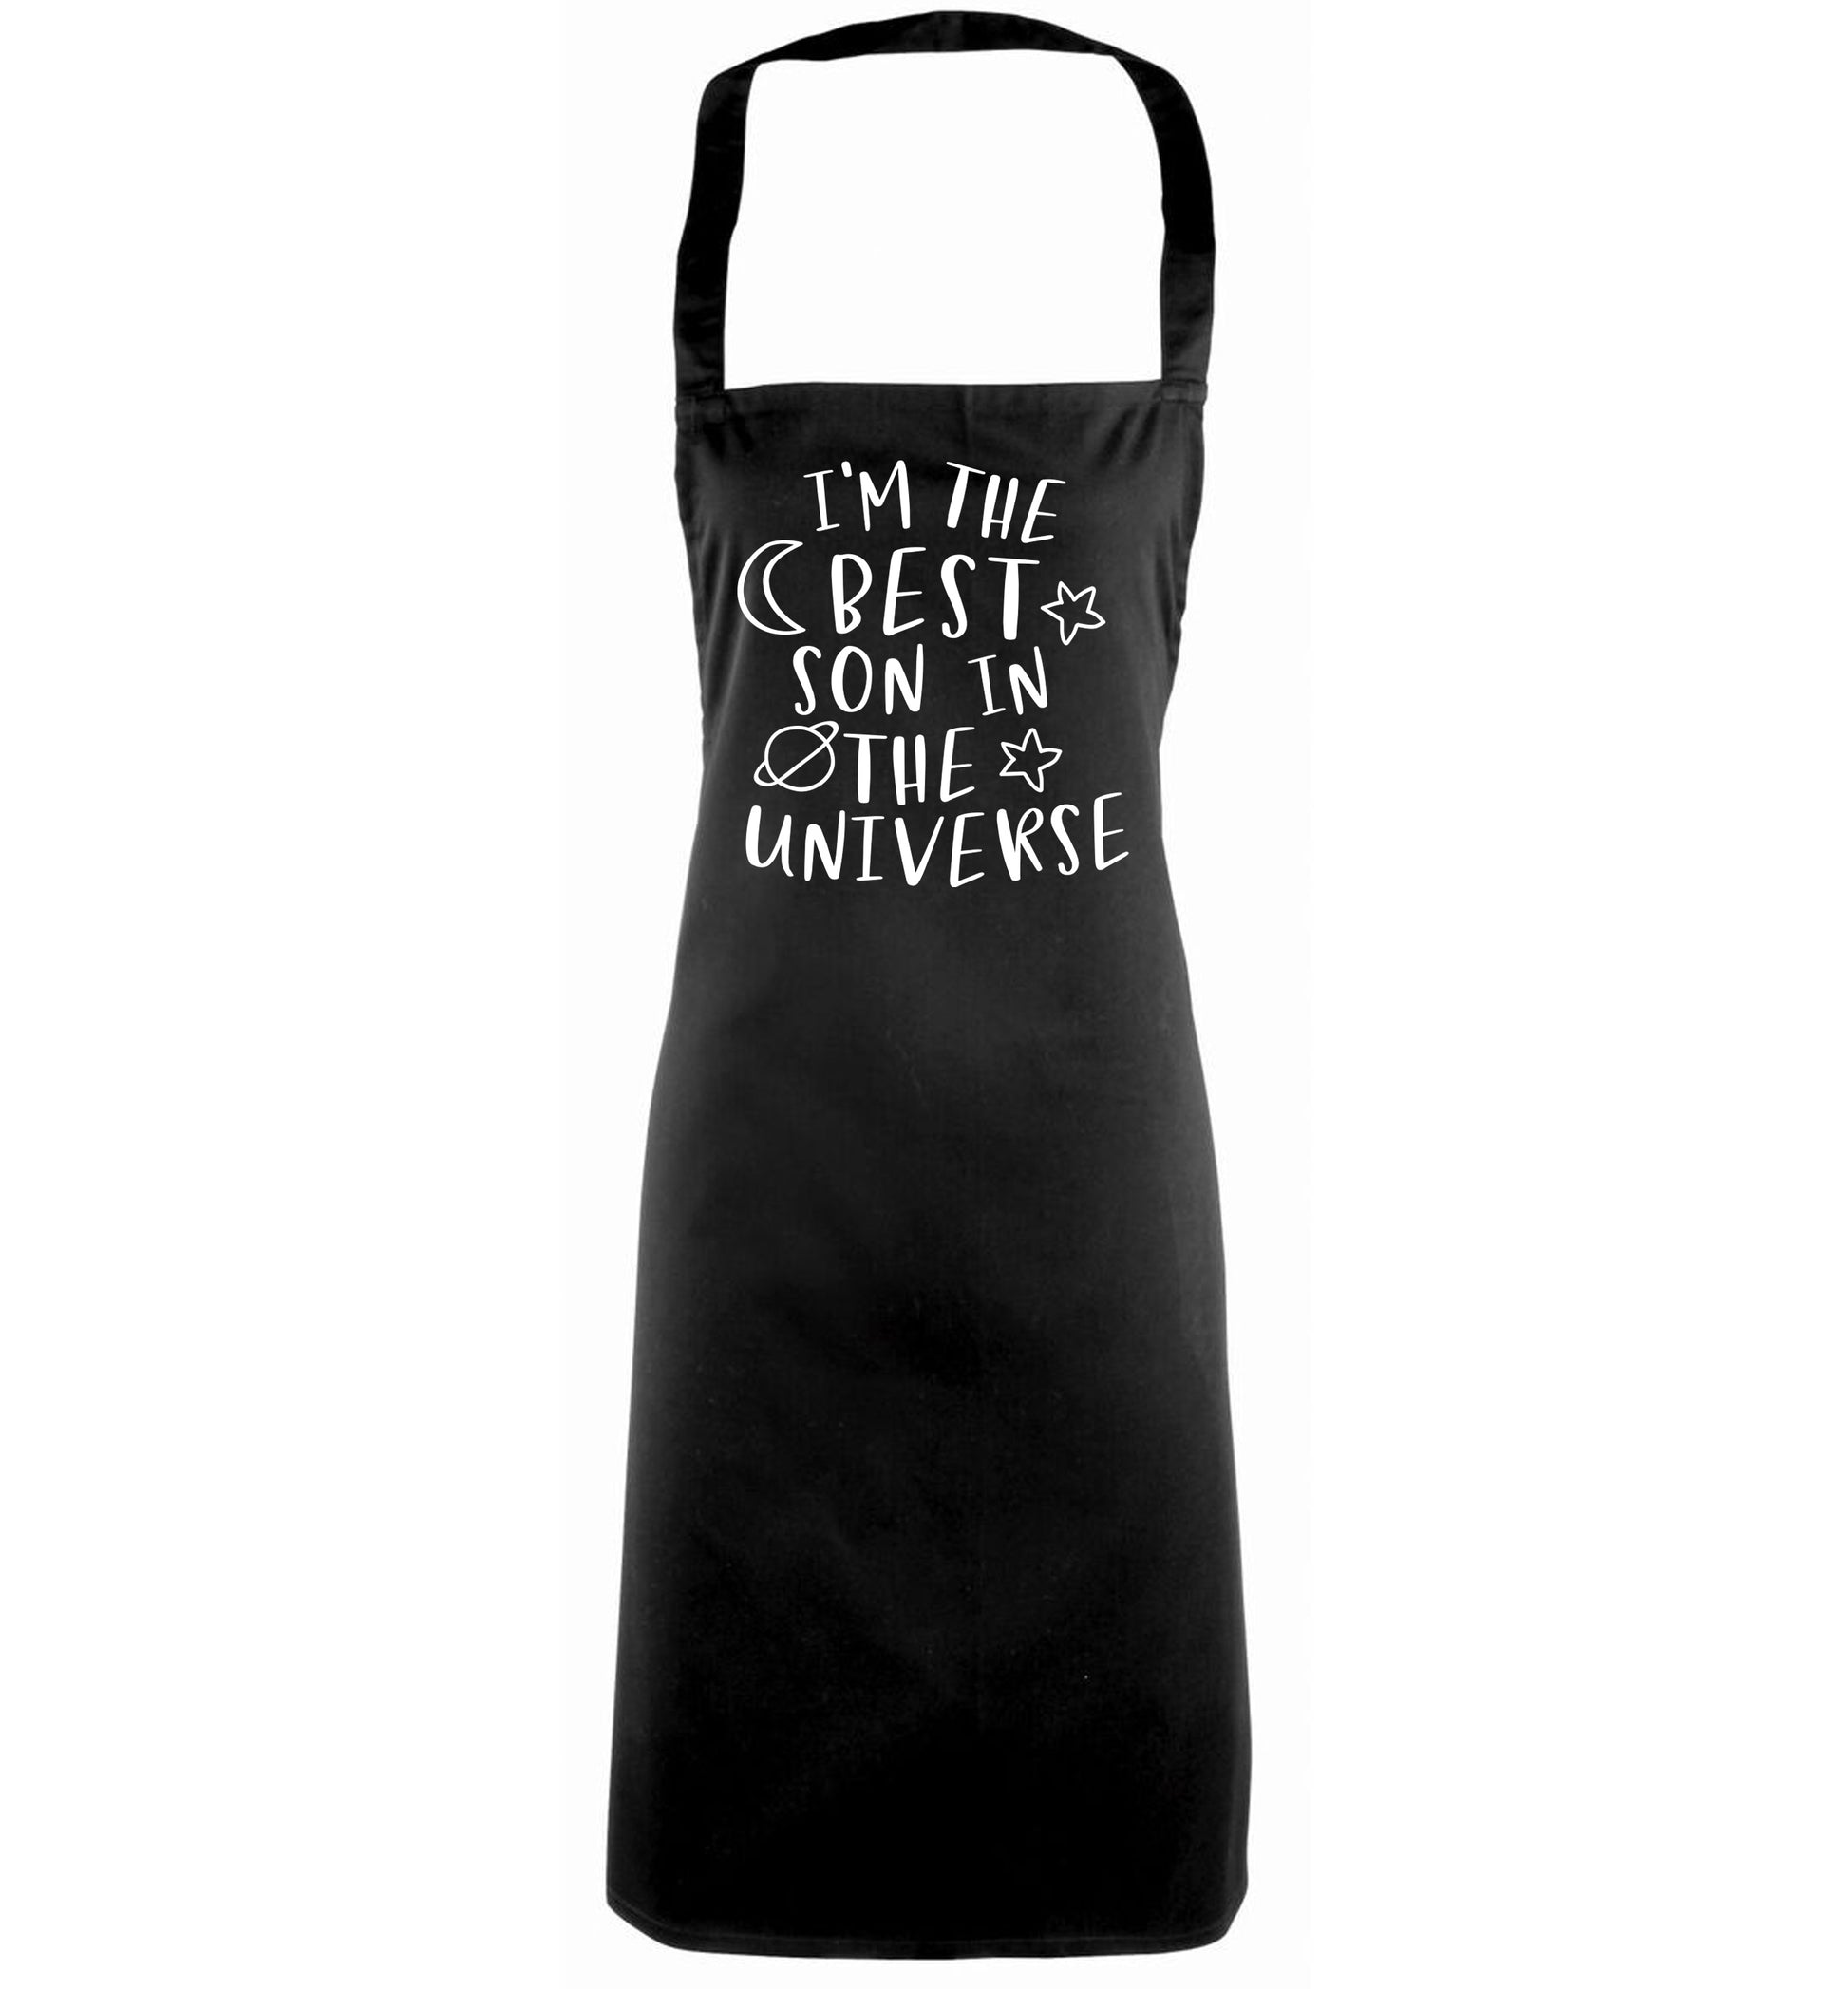 I'm the best son in the universe black apron